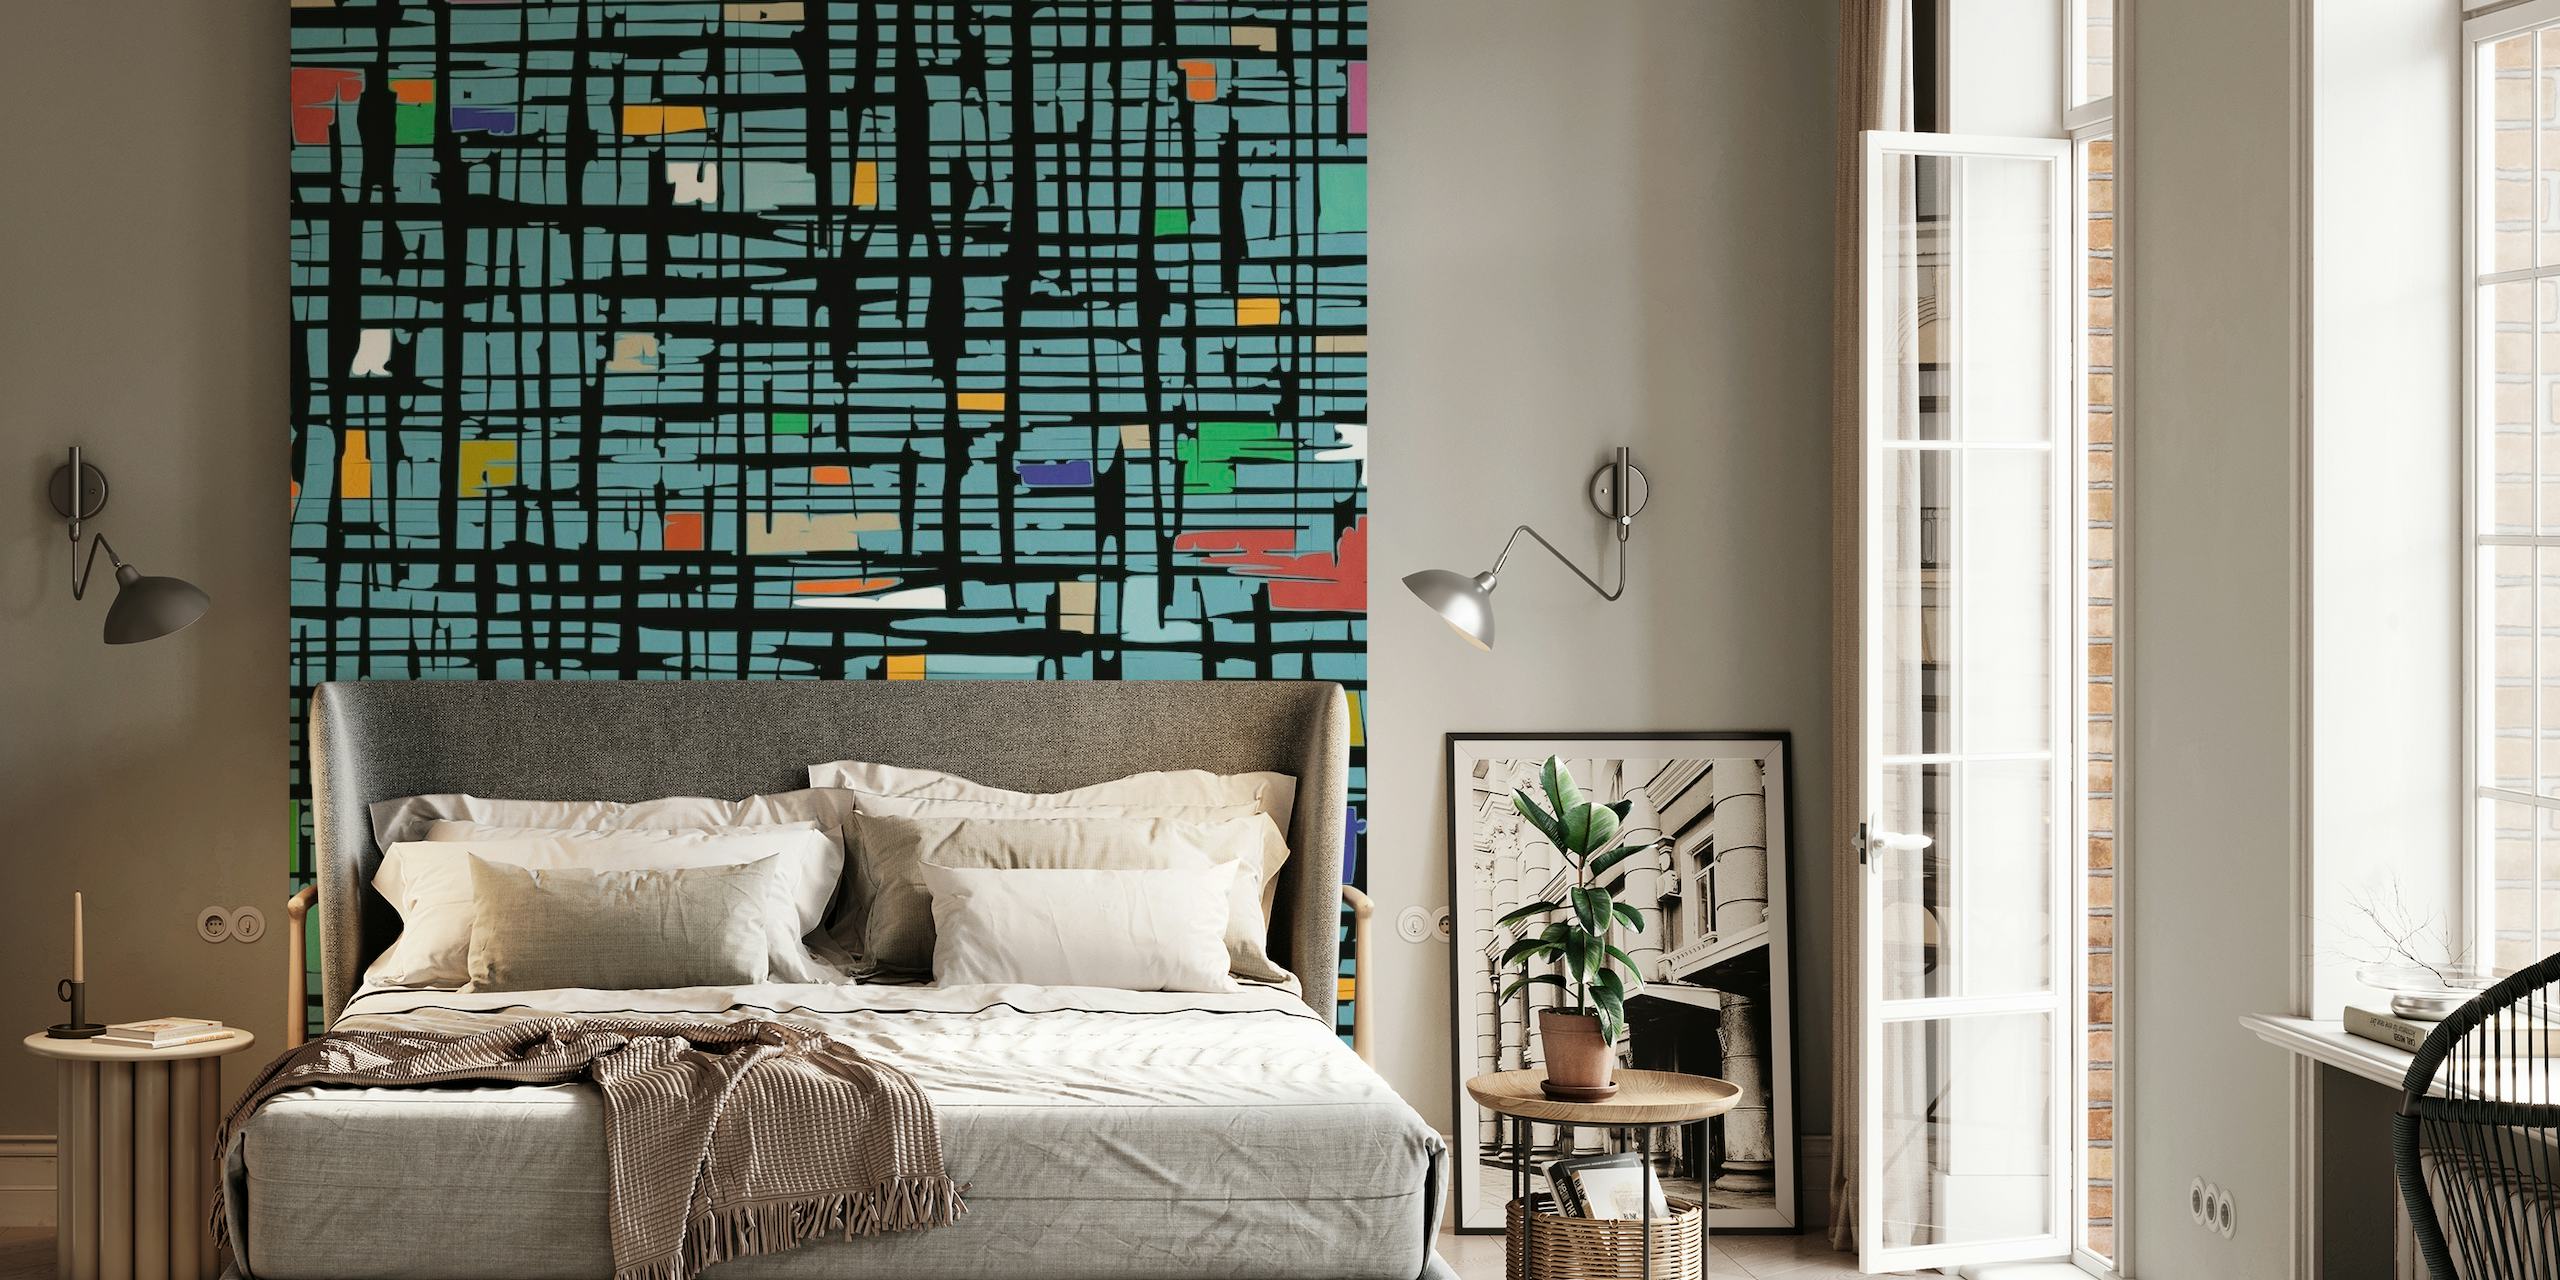 Abstract blue and black braided wall mural with colorful accents